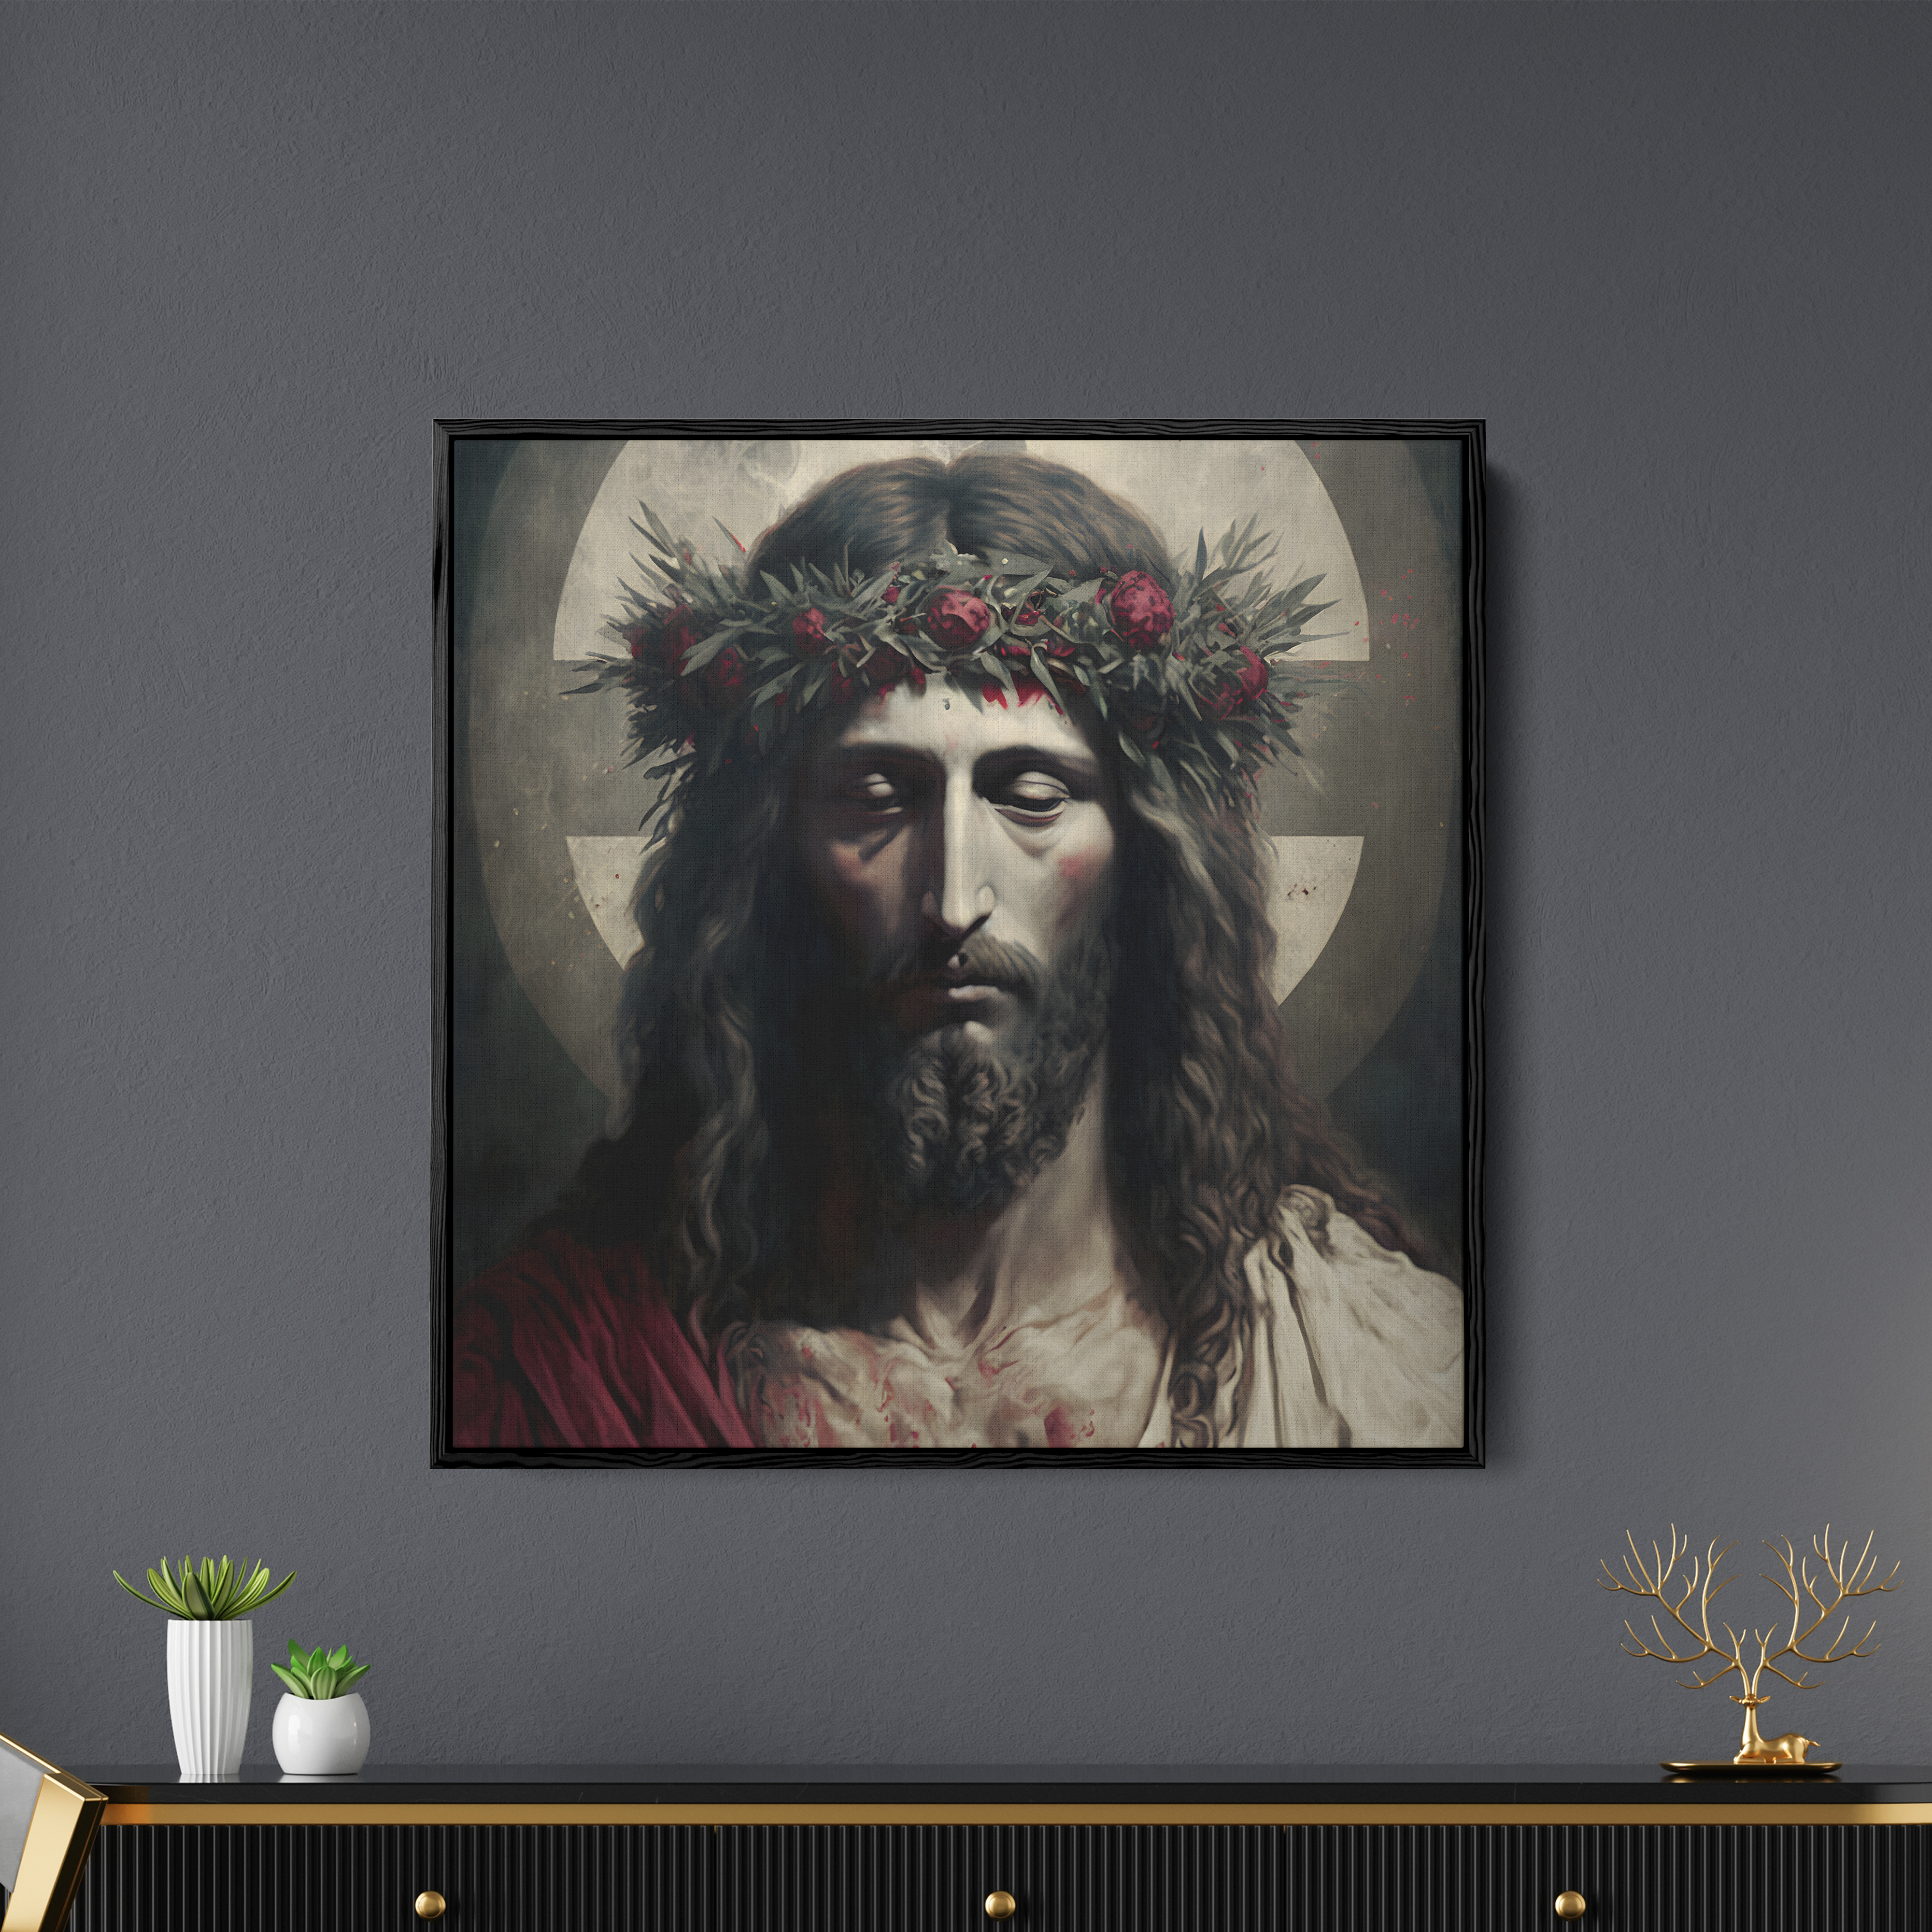 Jesus With Rose Crown On Head Canvas Wall Painting